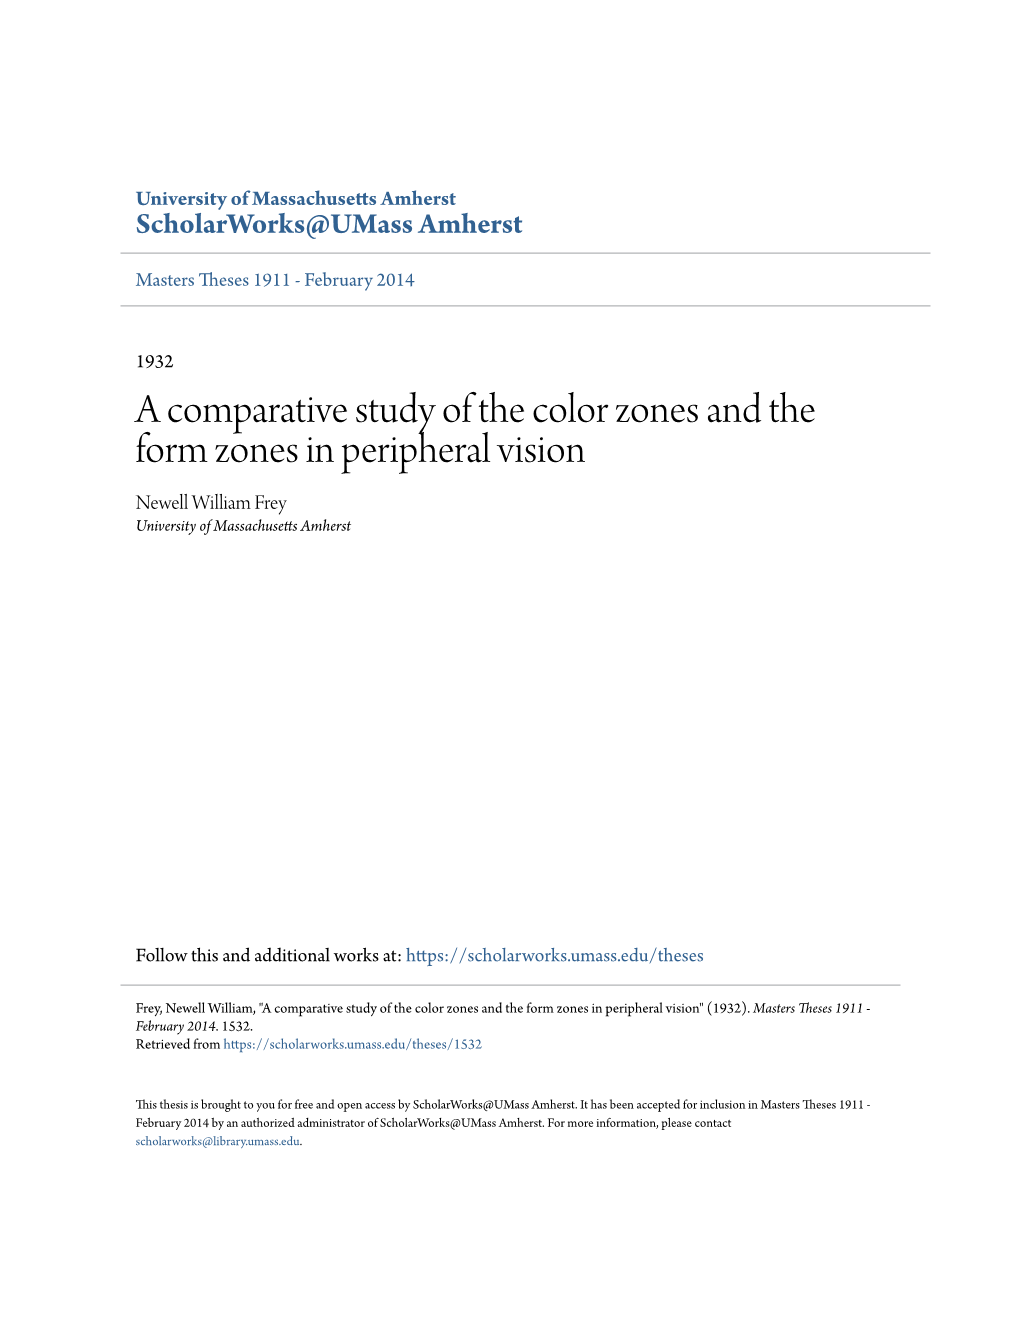 A Comparative Study of the Color Zones and the Form Zones in Peripheral Vision Newell William Frey University of Massachusetts Amherst